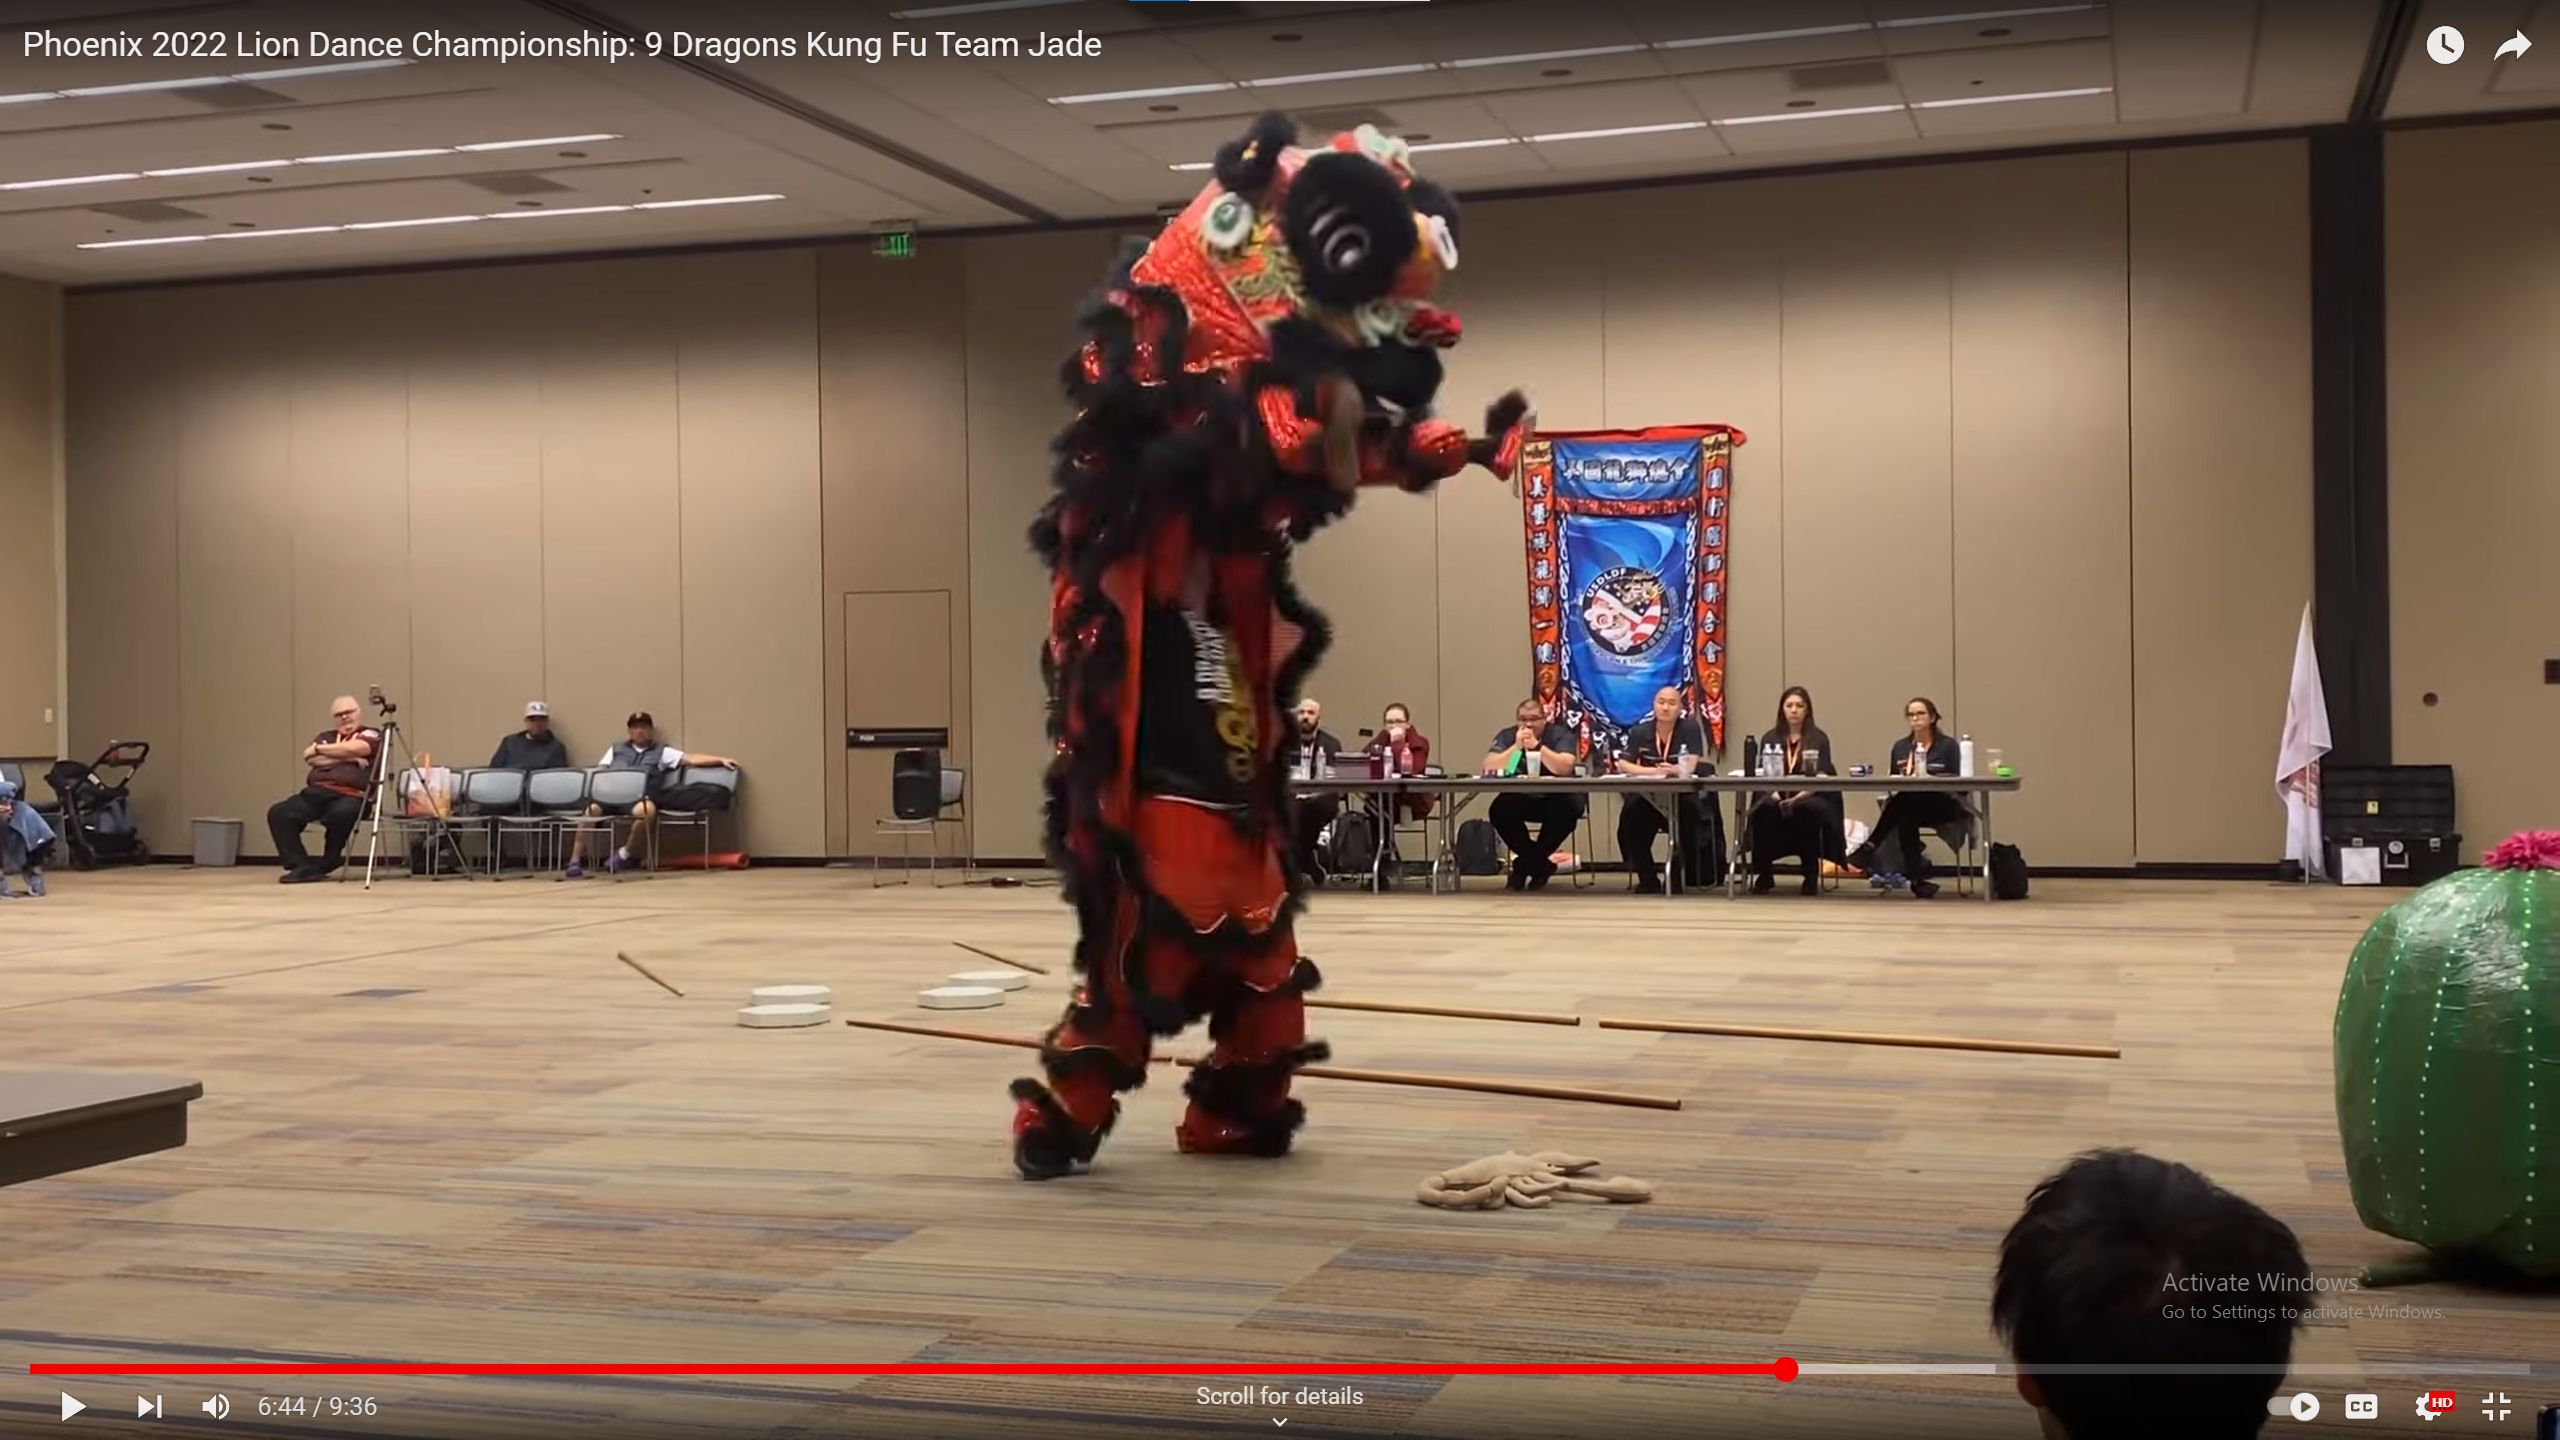 Load video: Watch the 9DLDAA Team Jade compete in the Phoenix 2022 Lion Dance Championship! They earned 3rd place.